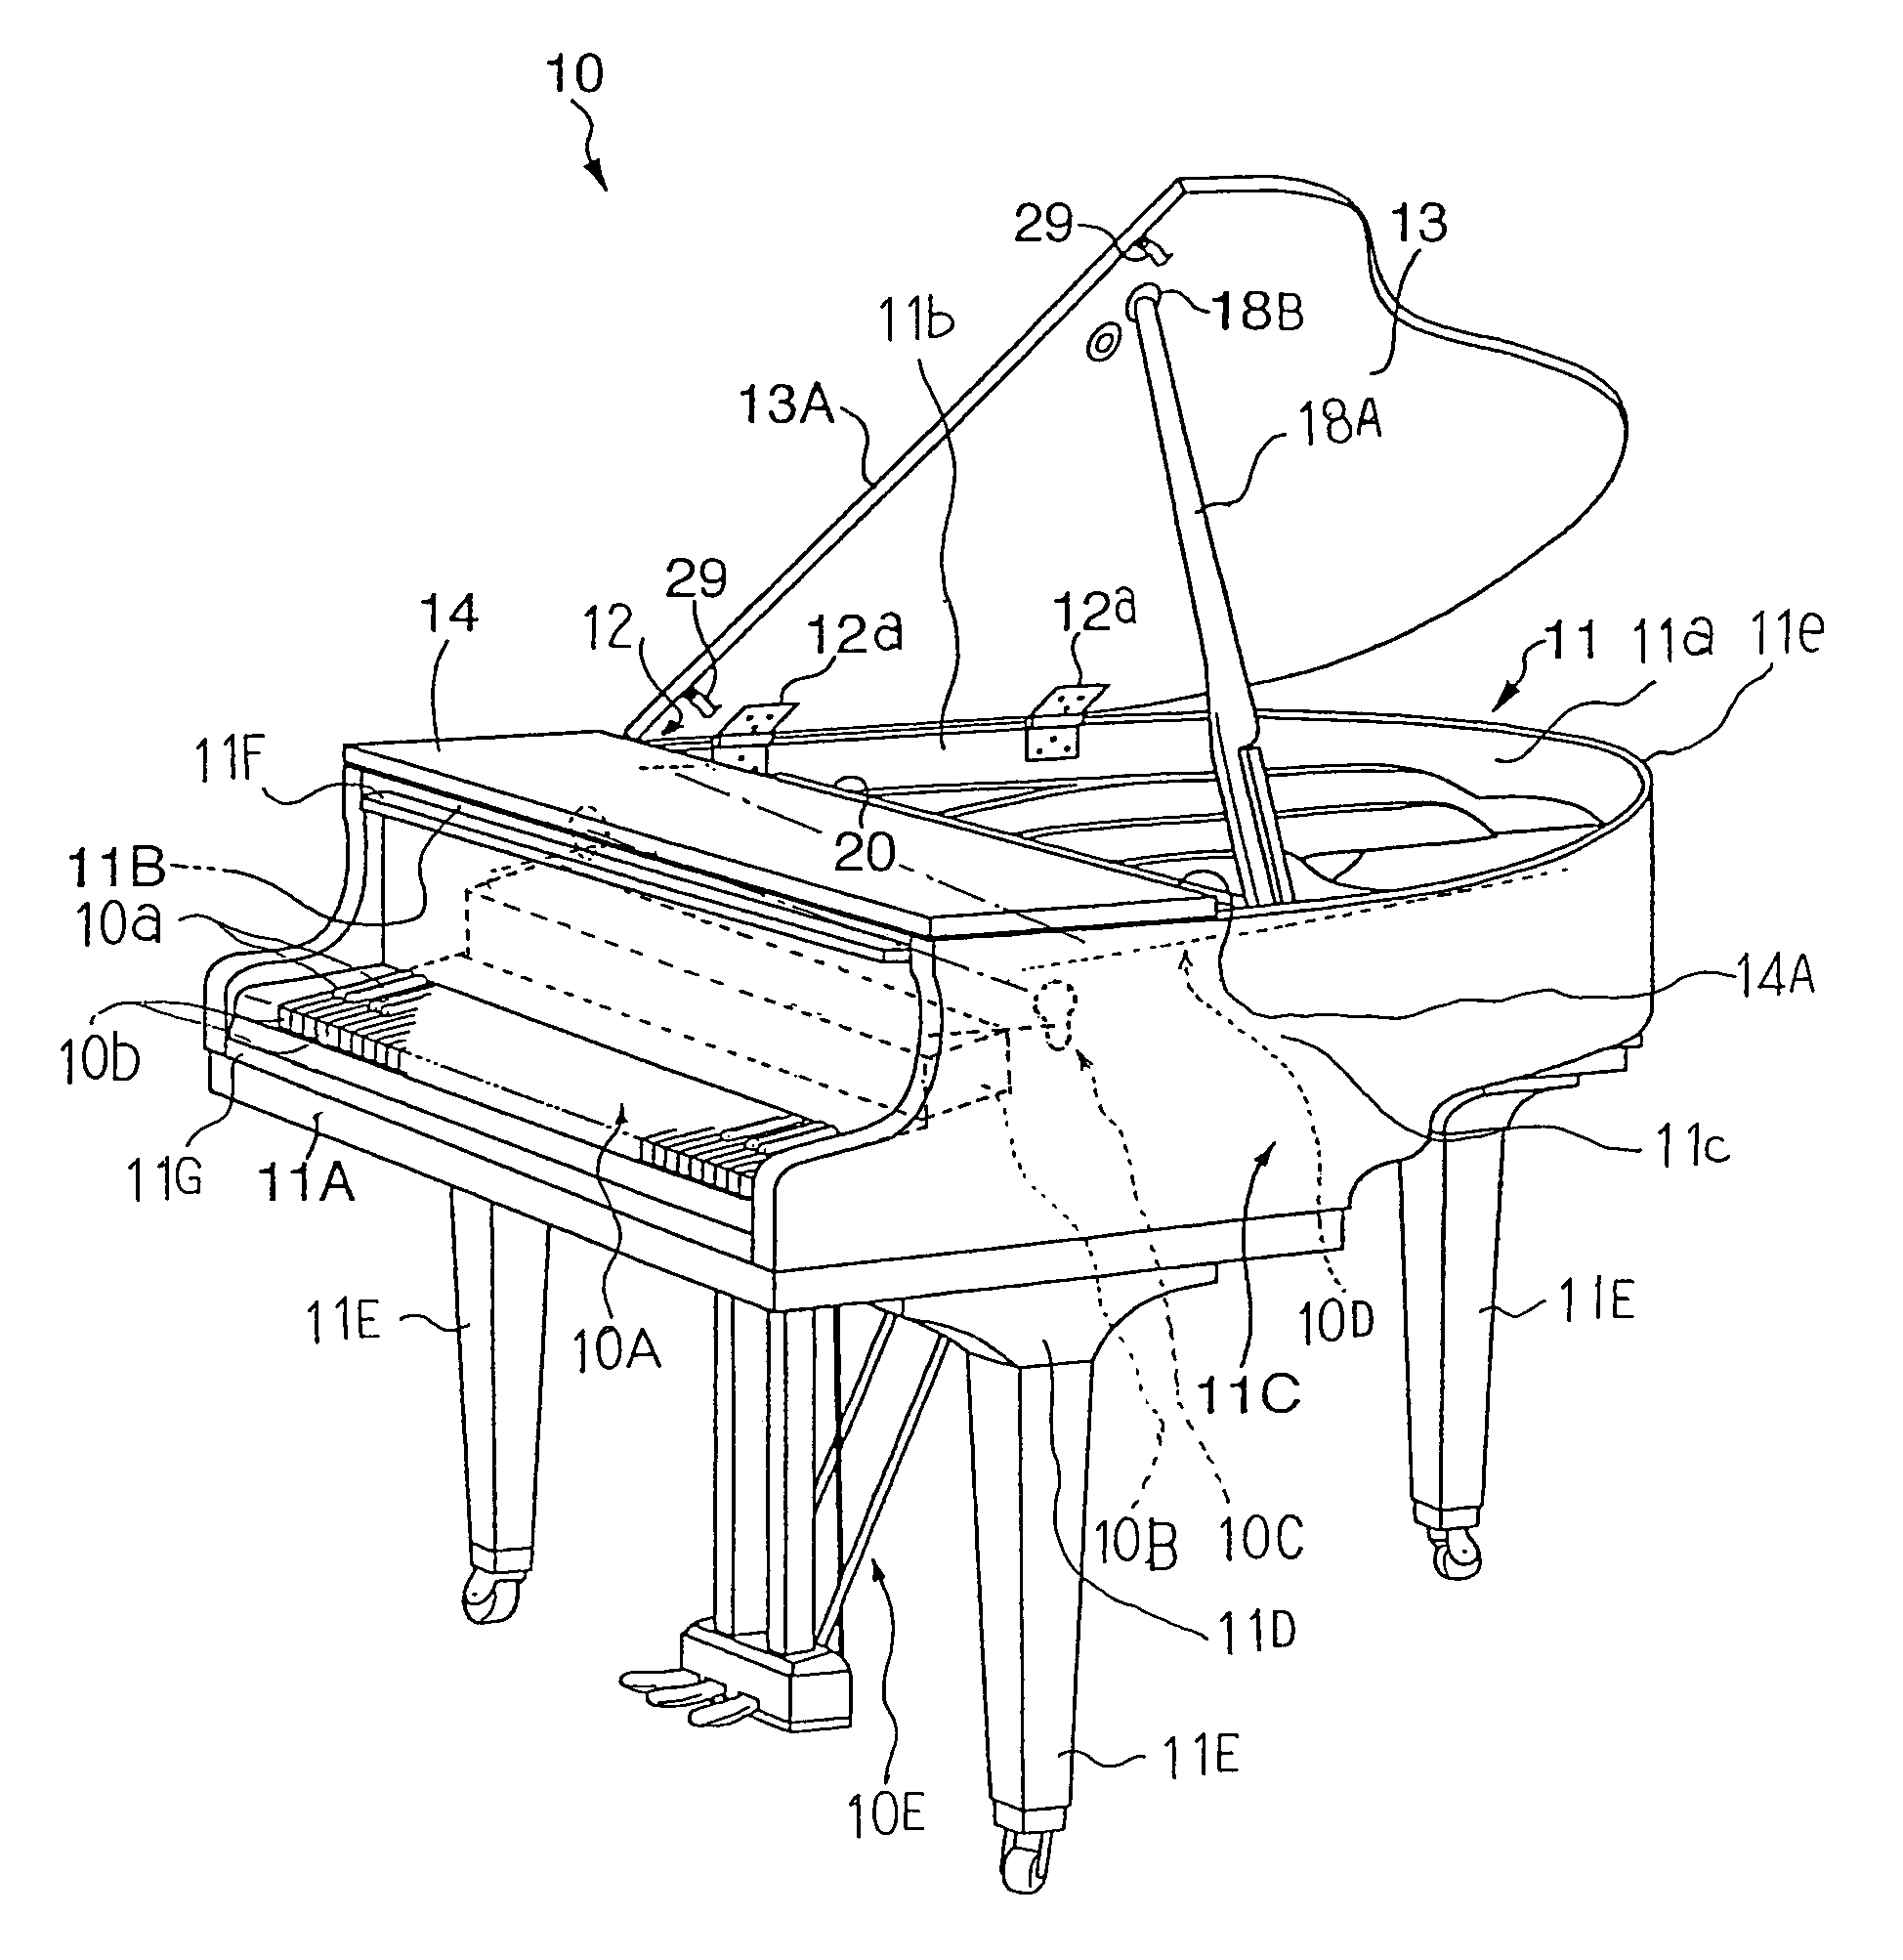 Keyboard musical instrument equipped with automatic top board spacer